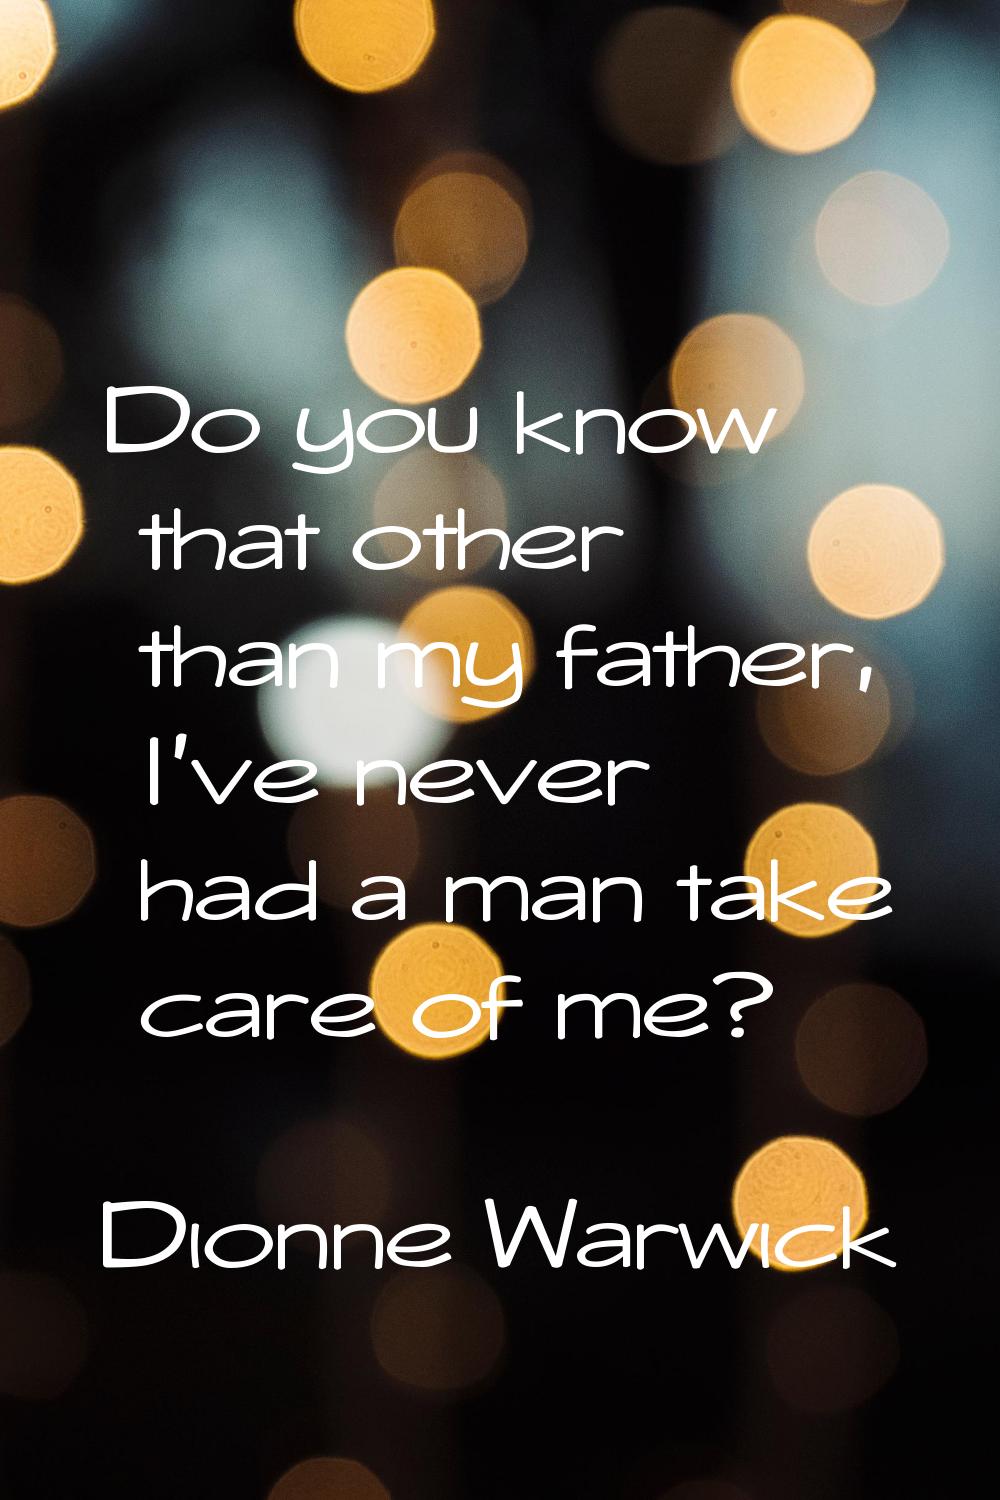 Do you know that other than my father, I've never had a man take care of me?